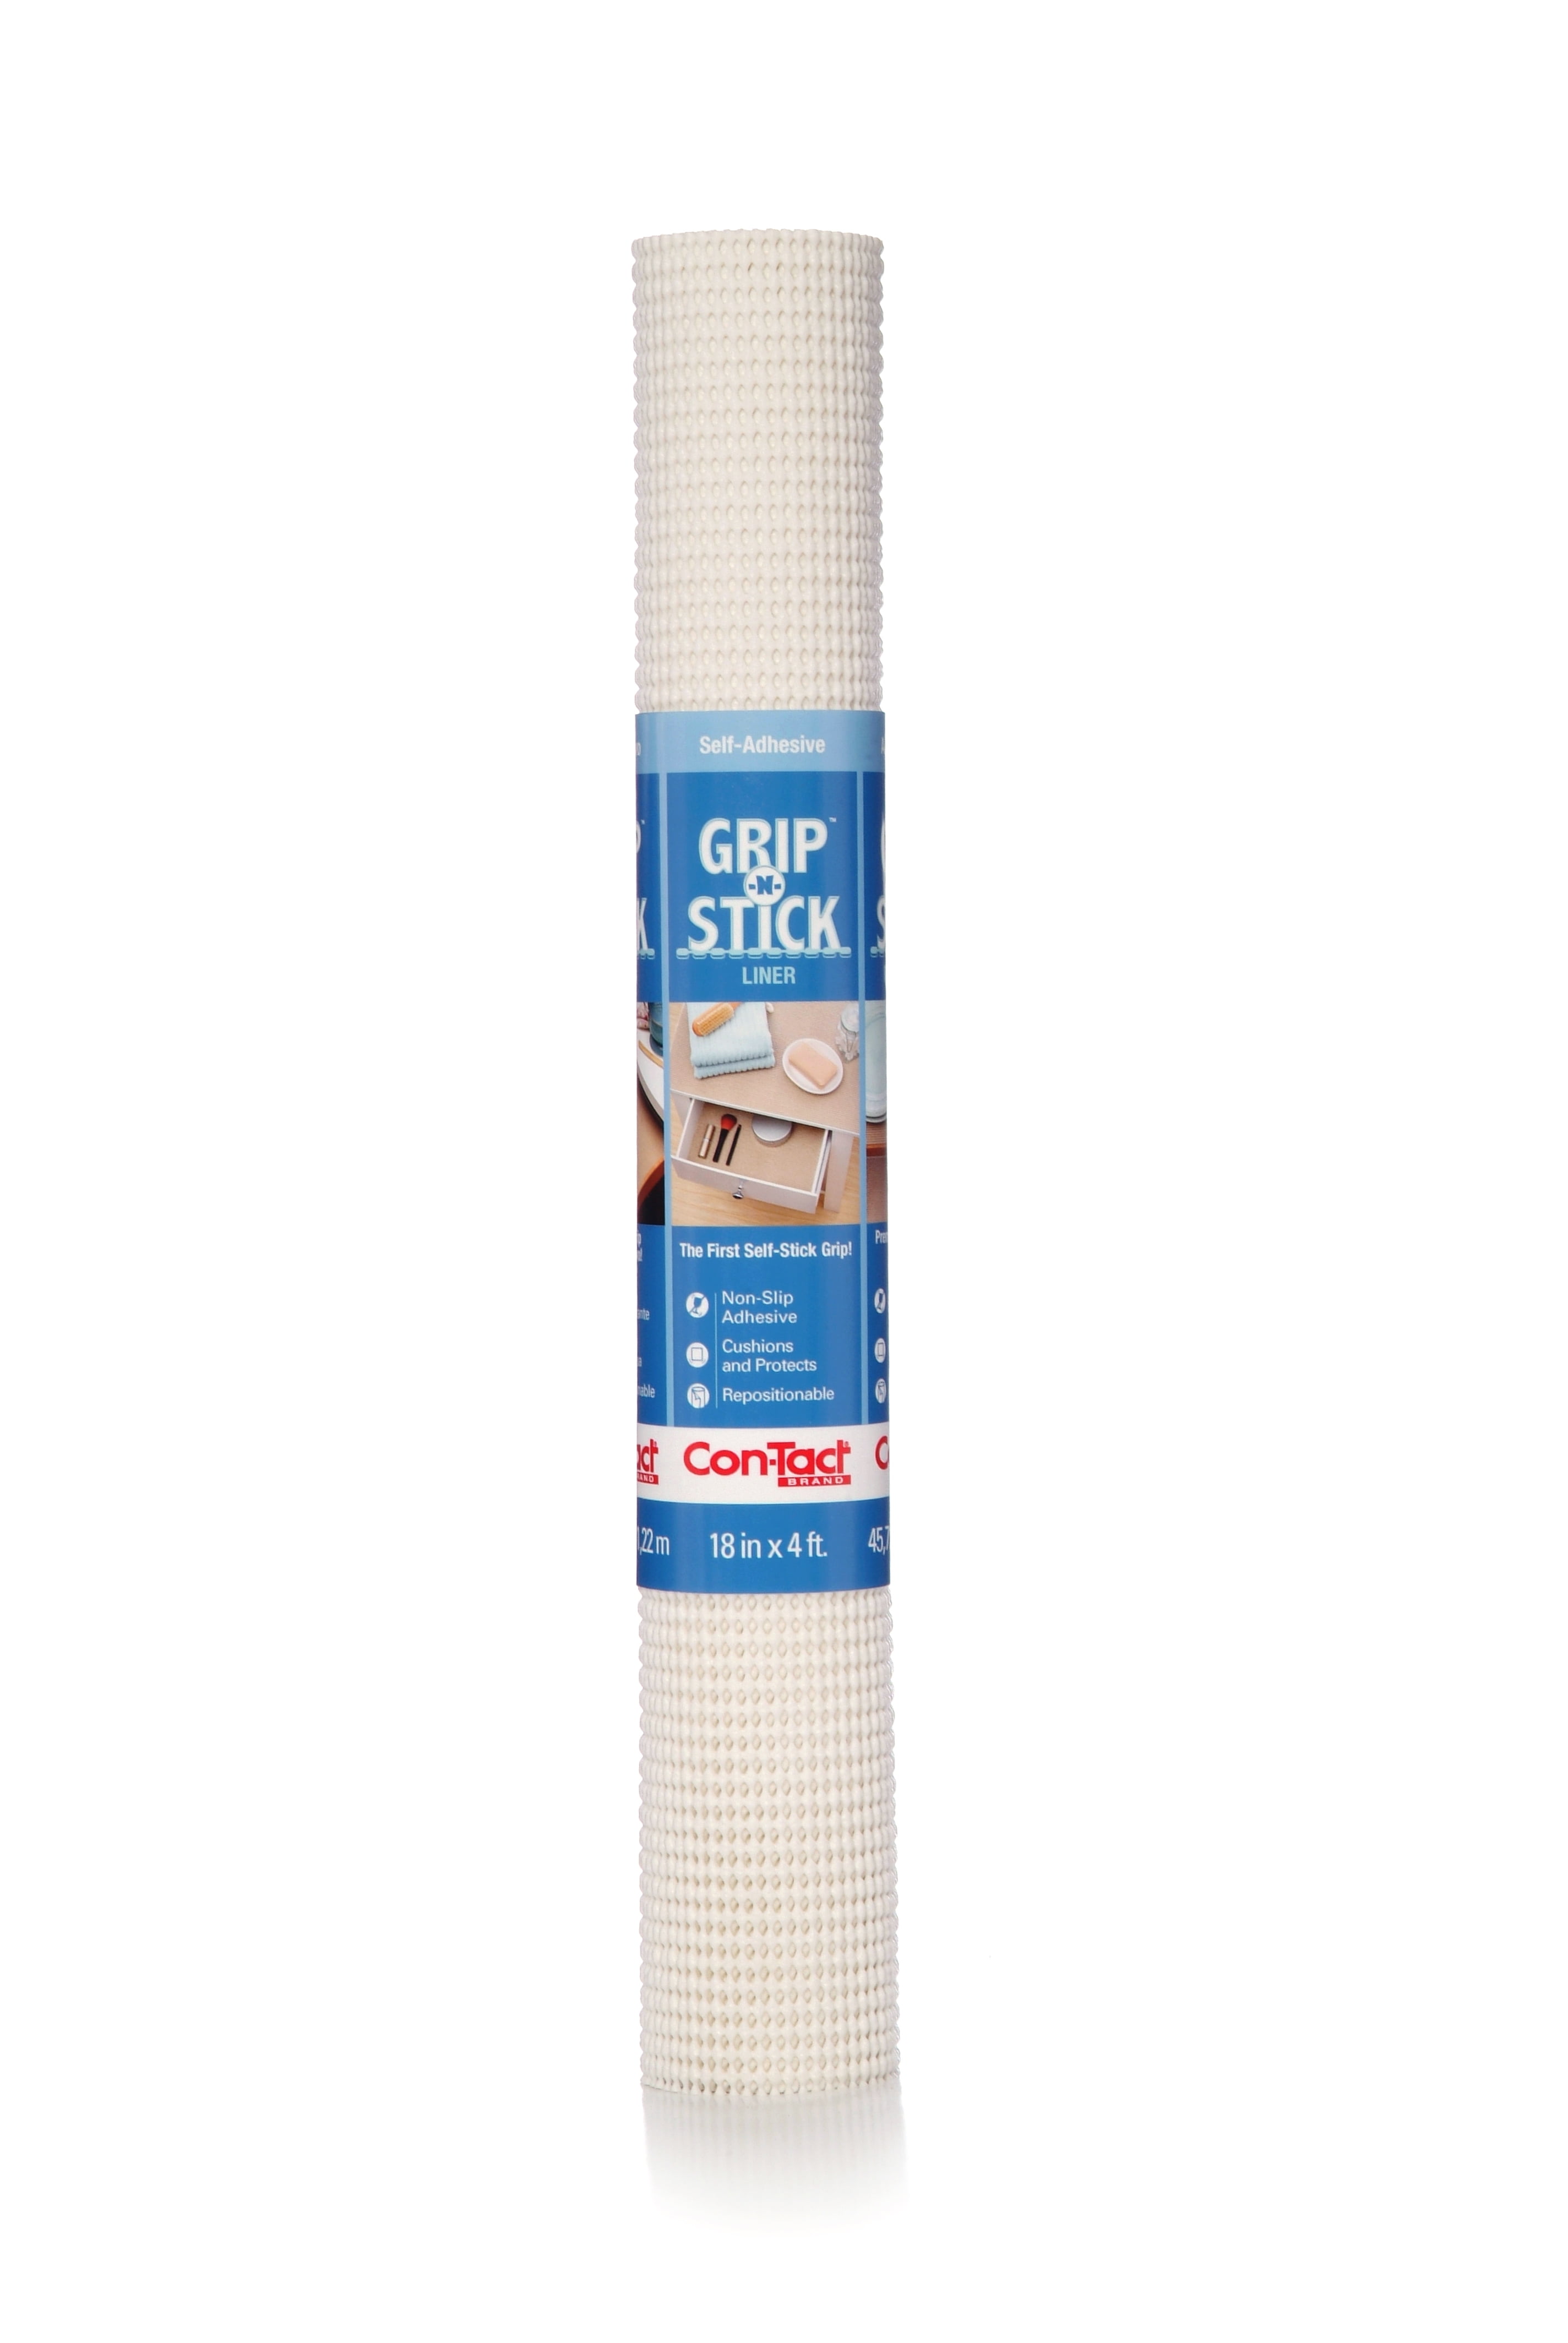 Con-Tact Grip Prints 18 in. x 4 ft. Black and White Non-Adhesive Shelf and Drawer Liner (6-Rolls)